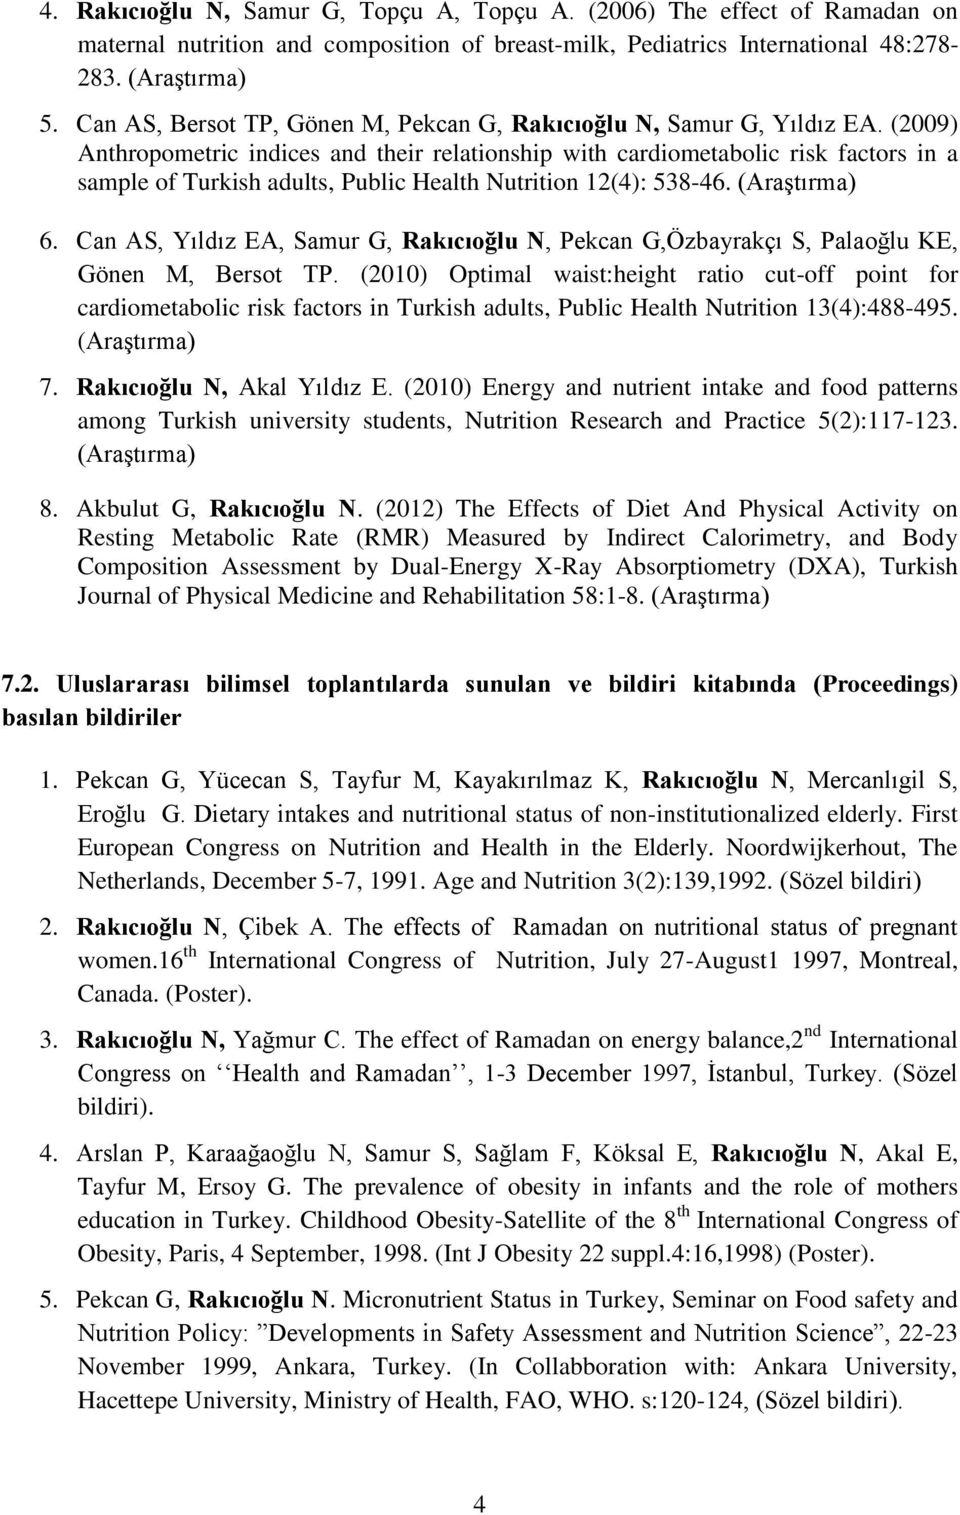 (2009) Anthropometric indices and their relationship with cardiometabolic risk factors in a sample of Turkish adults, Public Health Nutrition 12(4): 538-46. (Araştırma) 6.